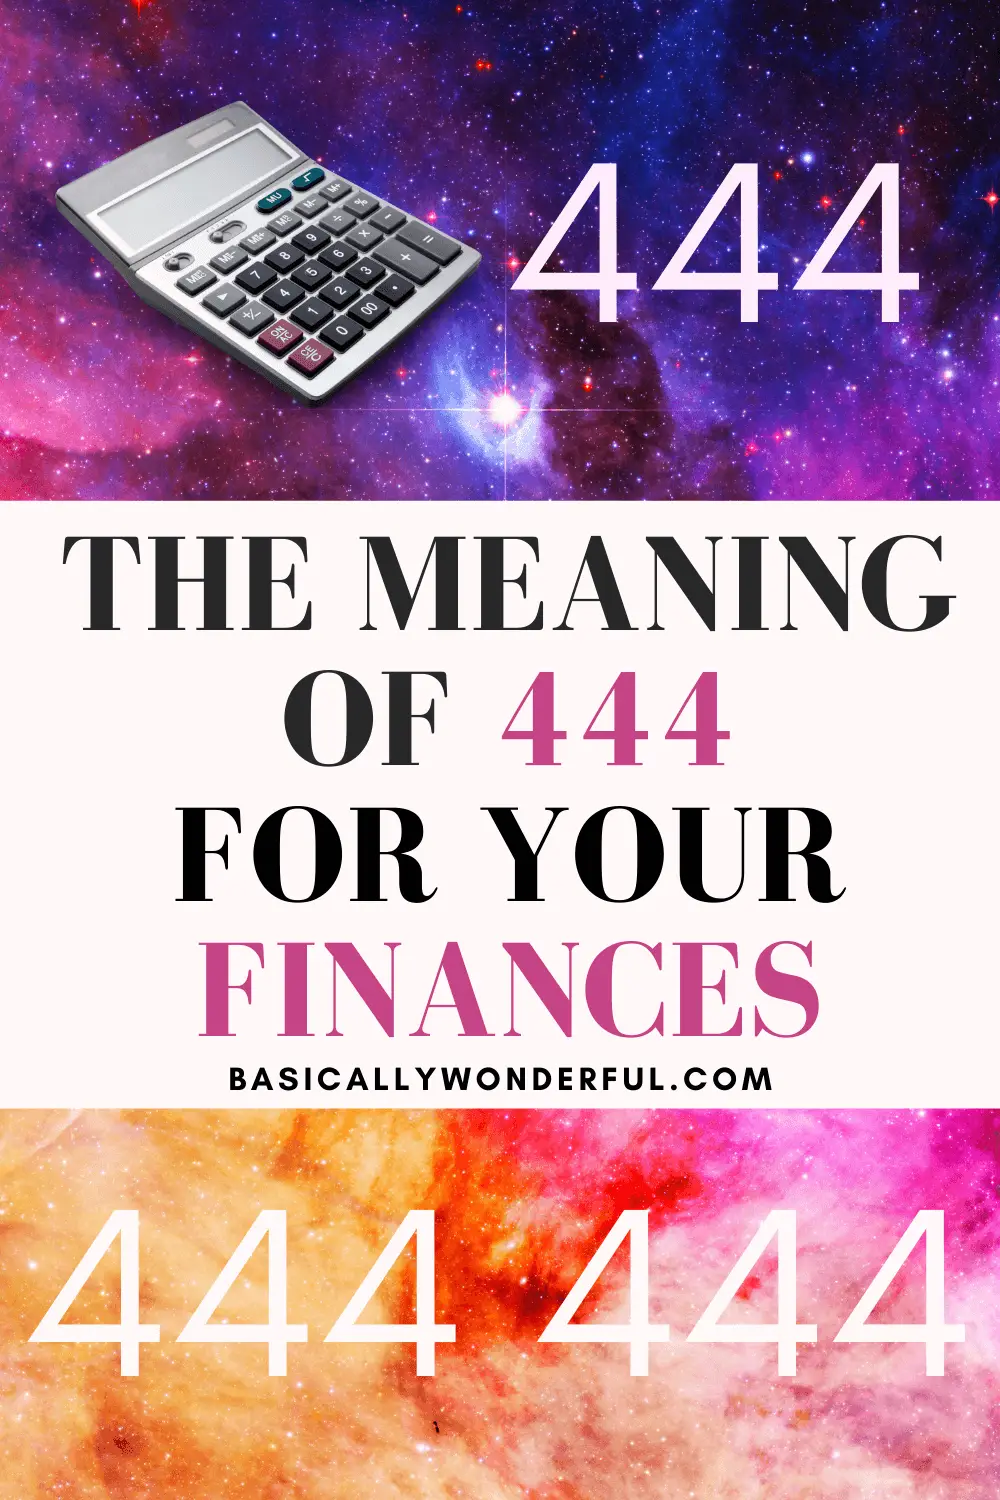 What Does 444 Mean In Terms Of Money?